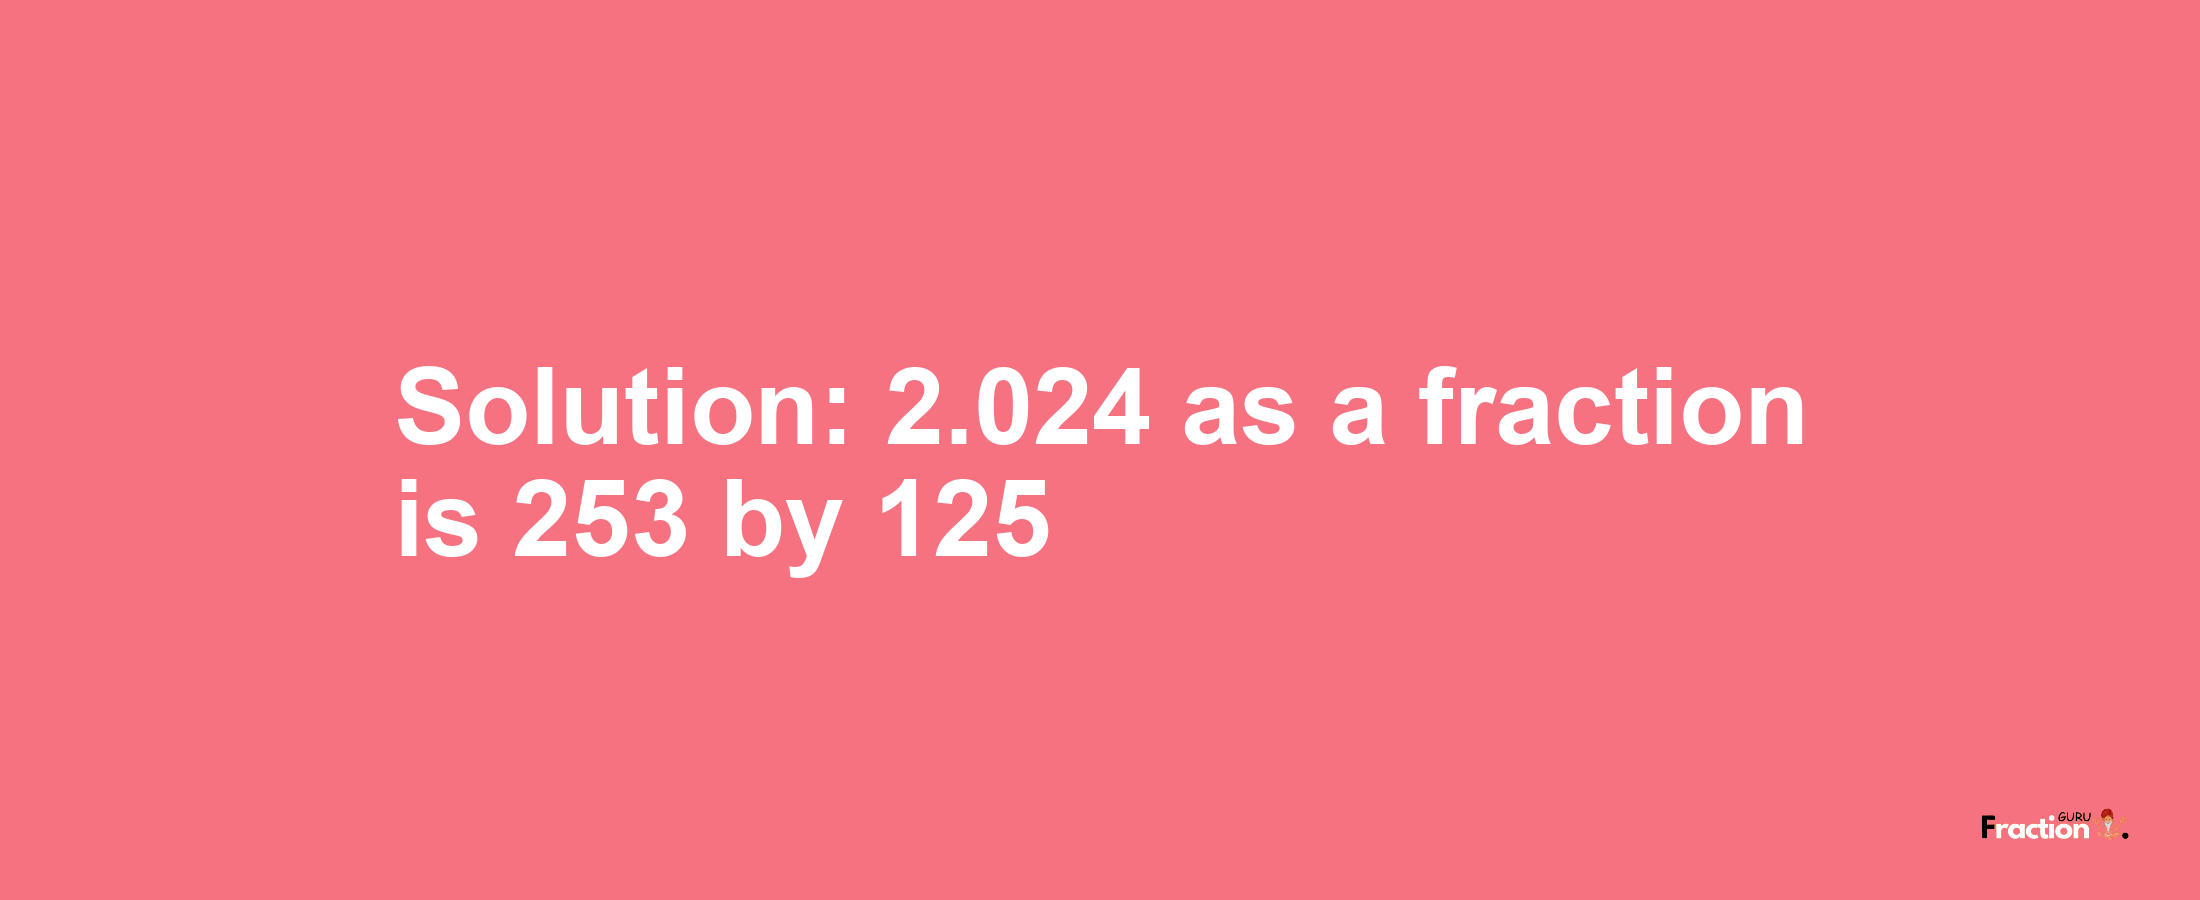 Solution:2.024 as a fraction is 253/125